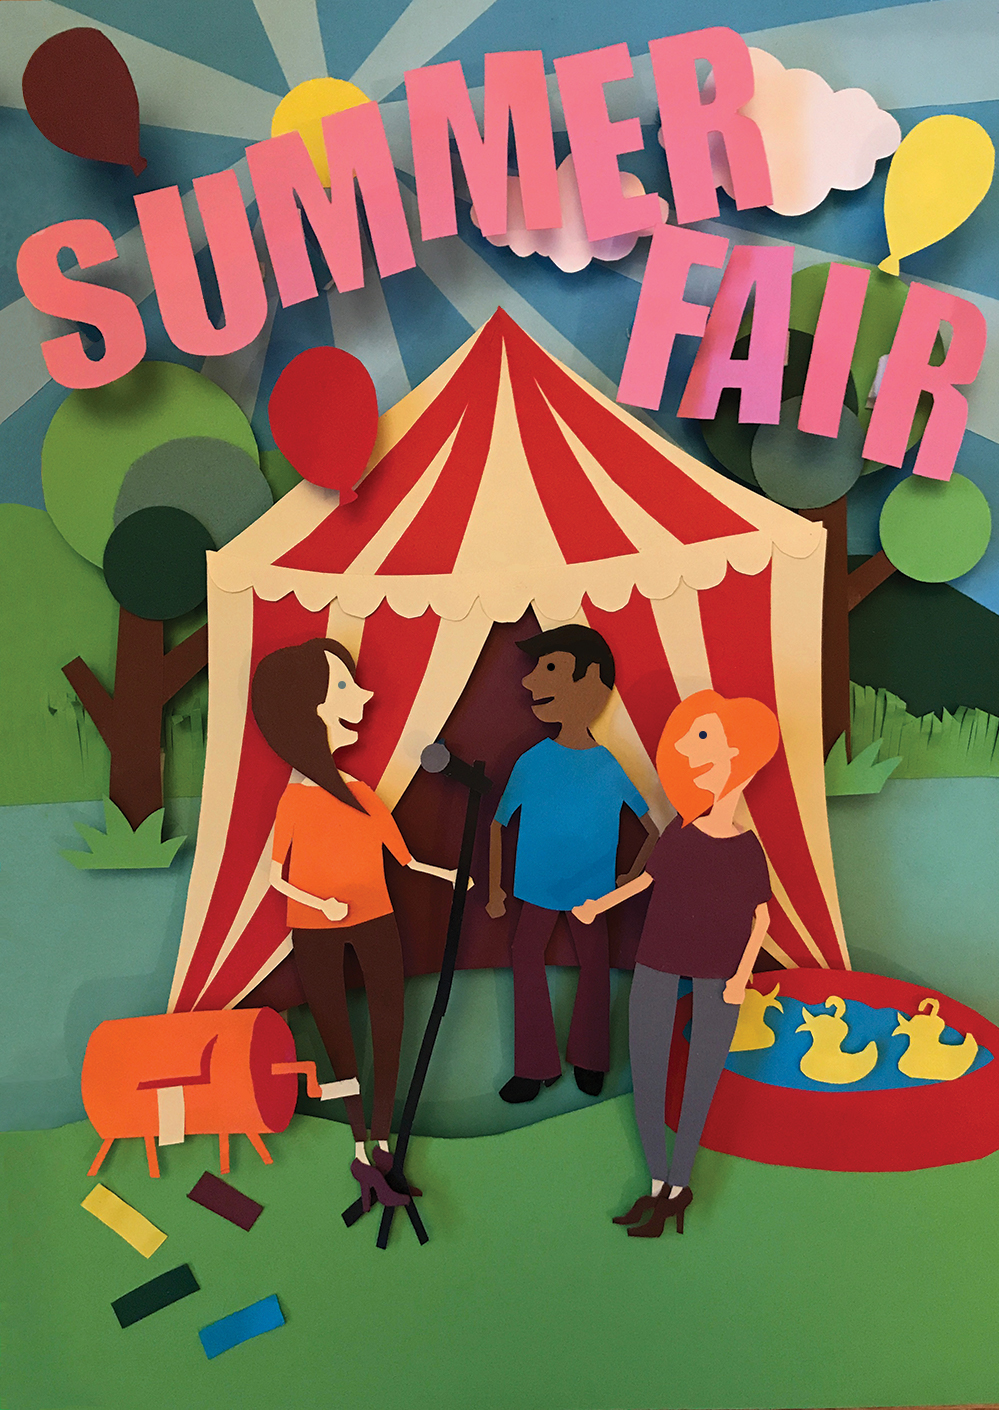 Summer fair poster without text